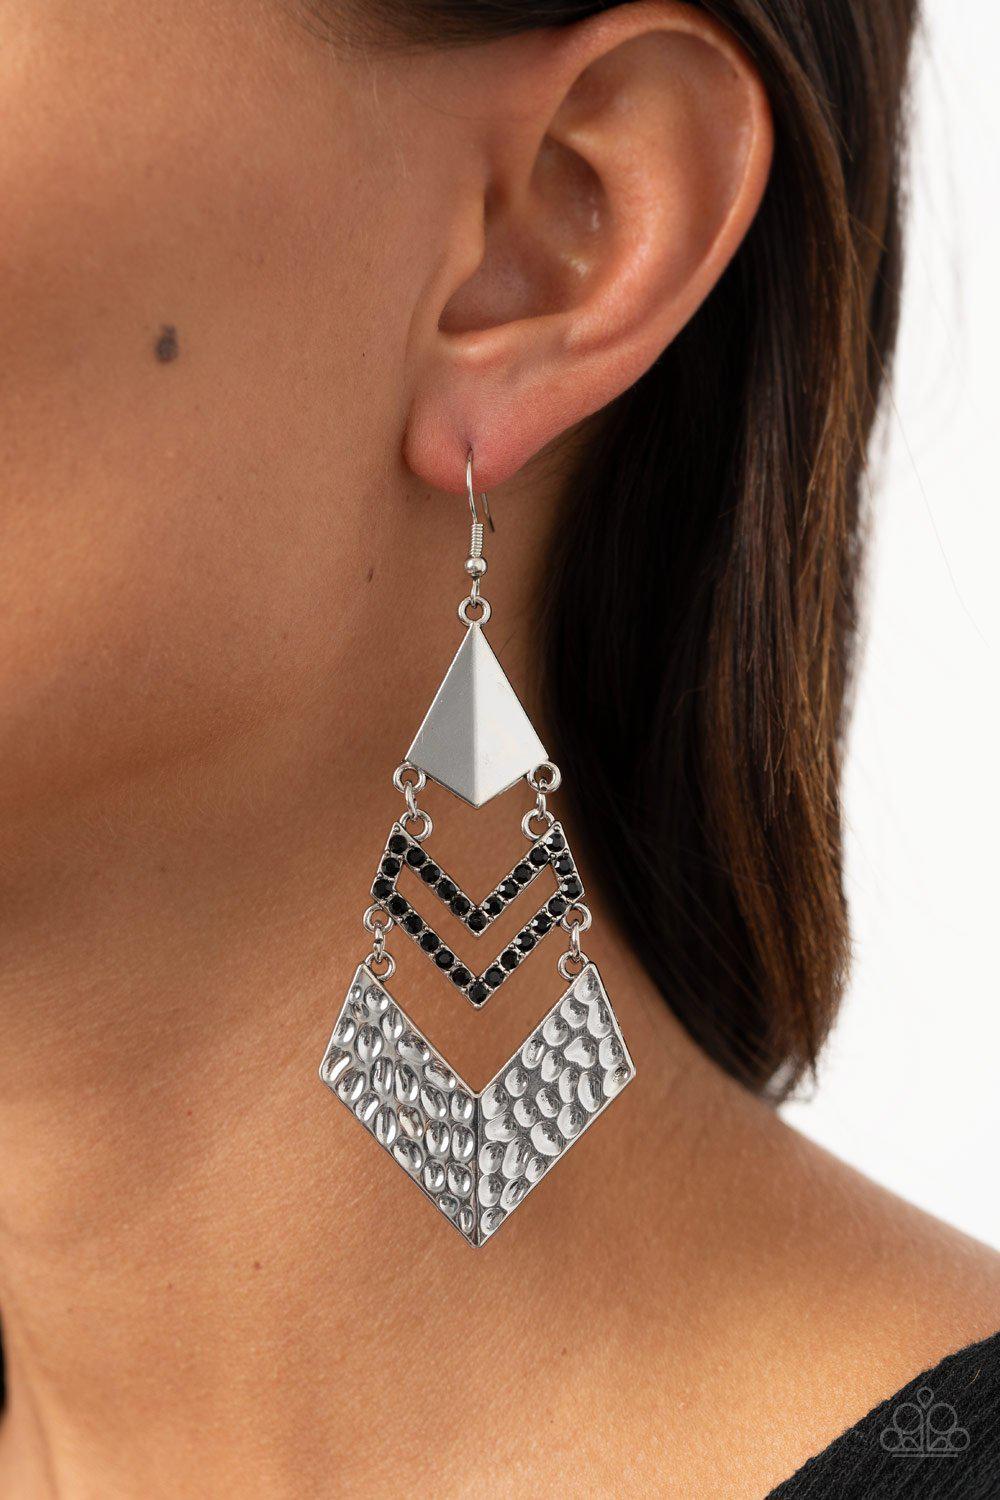 Work Hazard Black and Silver Earrings - Paparazzi Accessories - model -CarasShop.com - $5 Jewelry by Cara Jewels